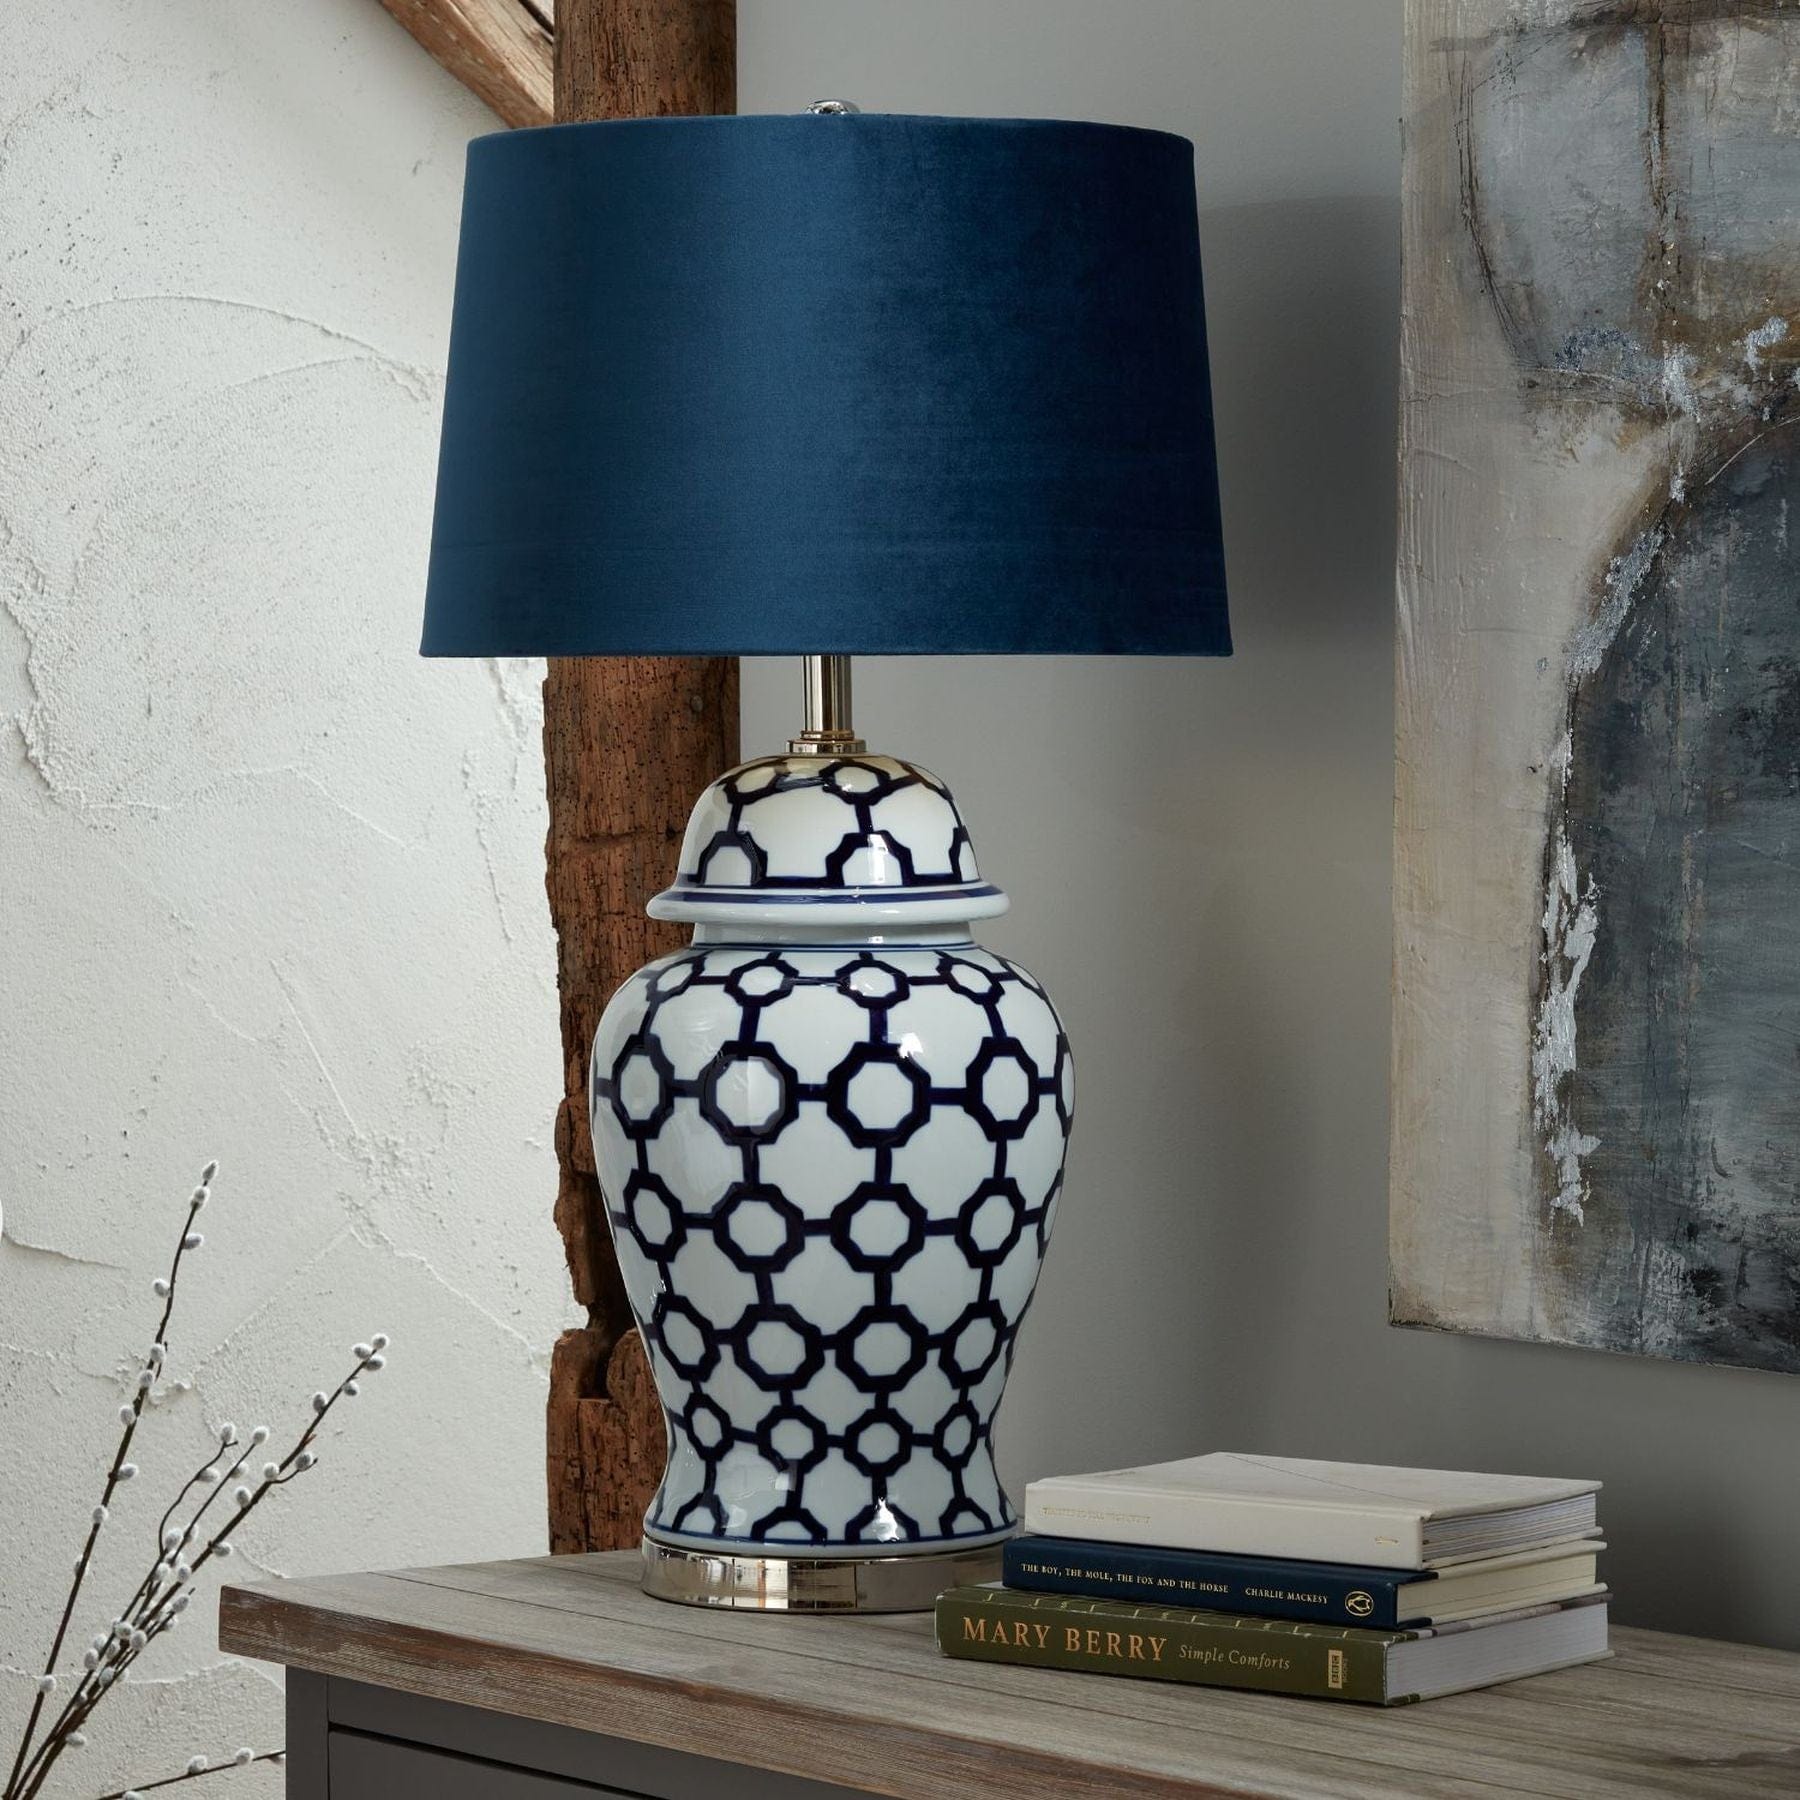 Hill Interiors Table lamp Acanthus Blue And White Ceramic Lamp With Blue Velvet Shade